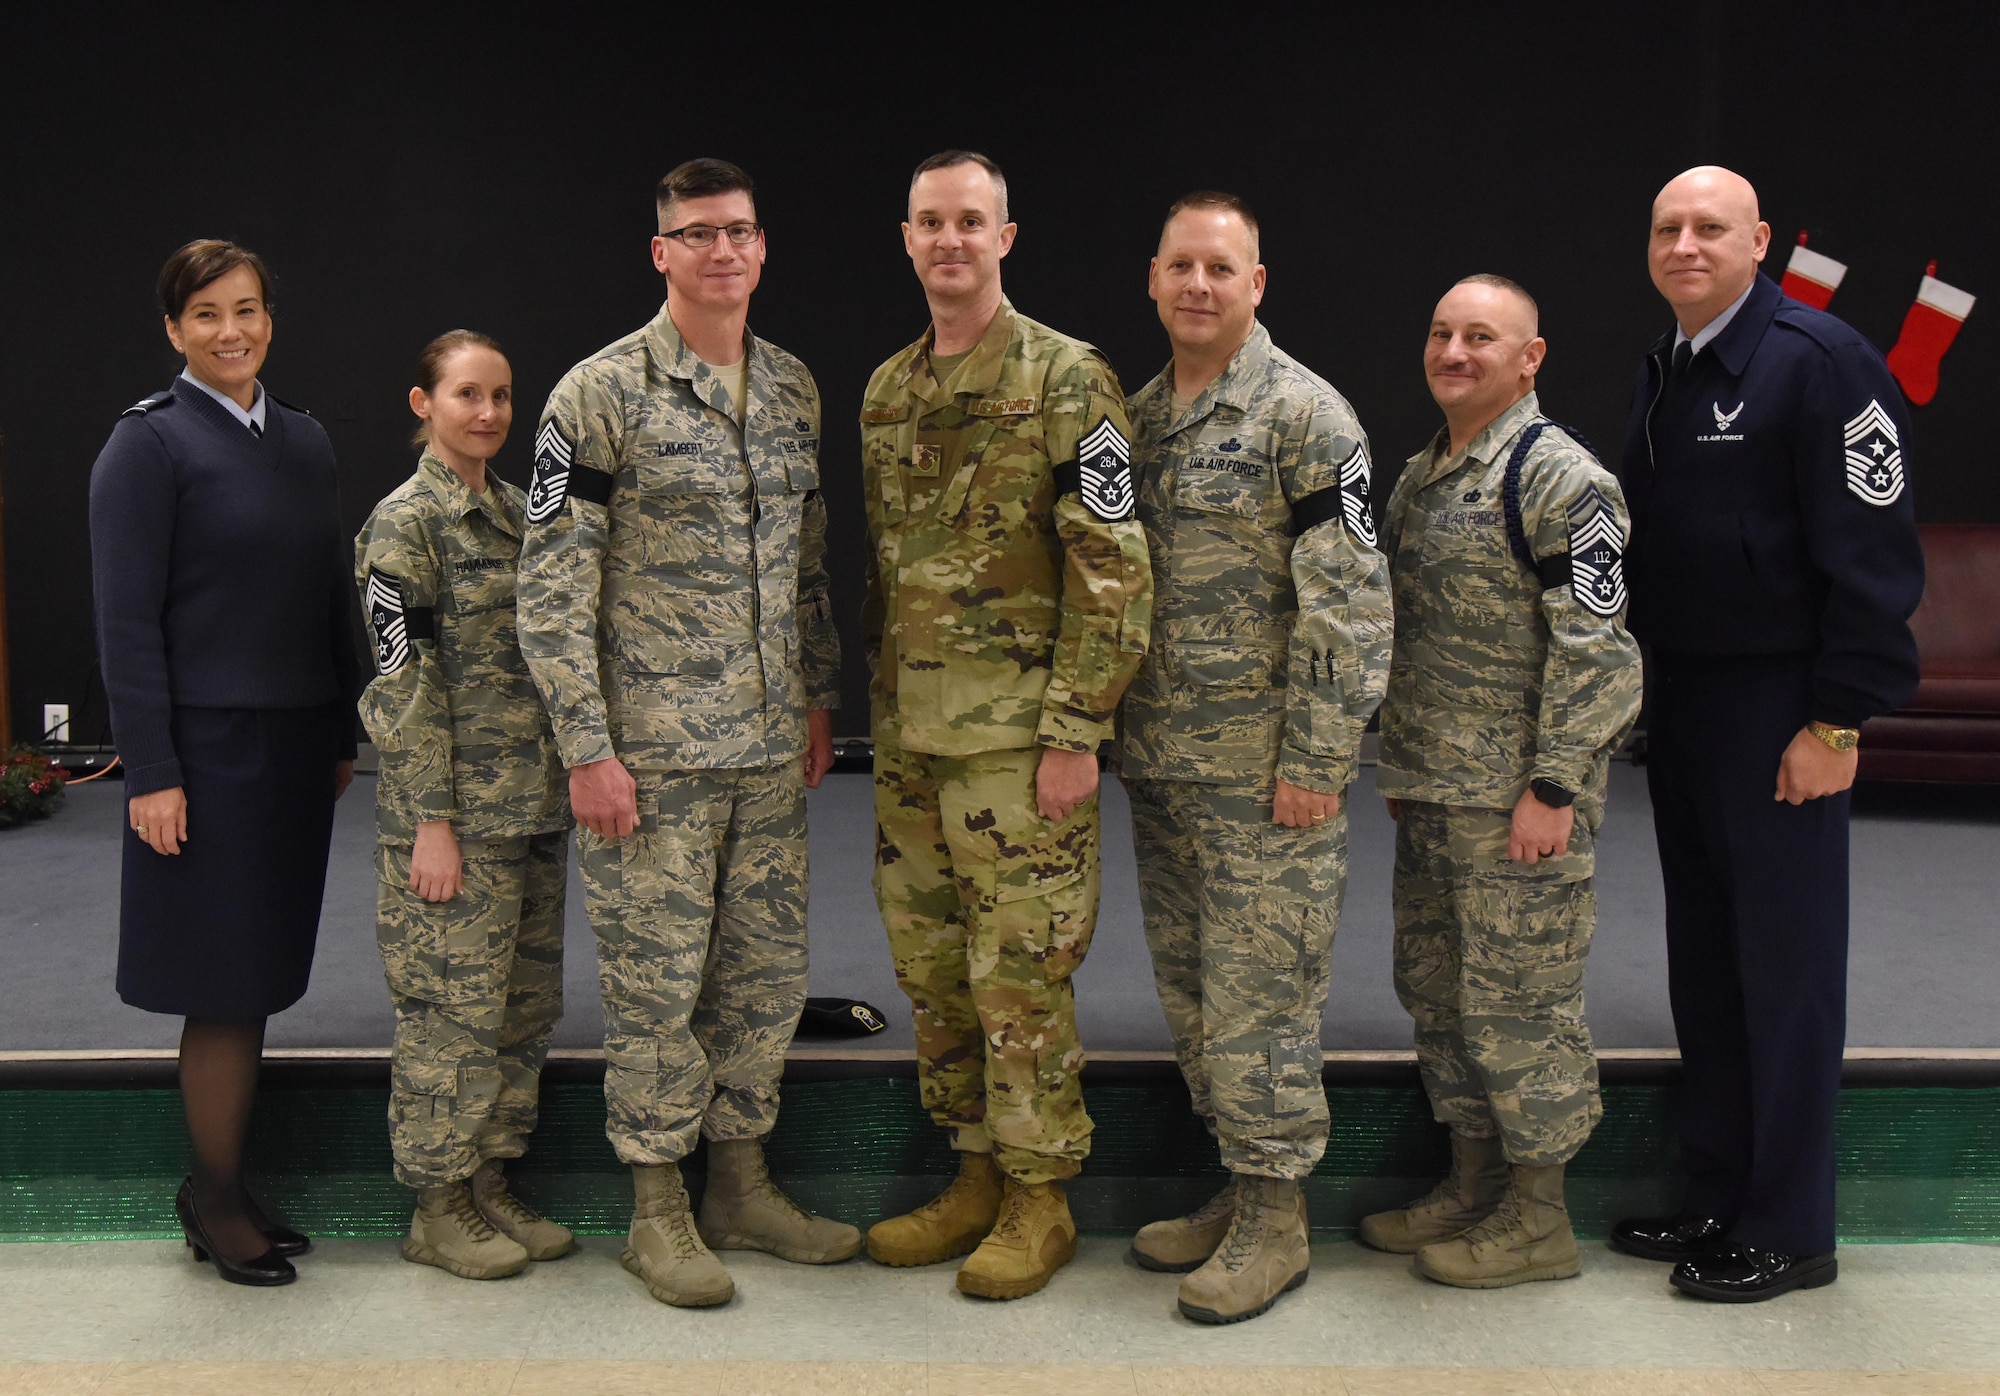 U.S. Air Force Col. Debra Lovette, 81st Training Wing commander, and Chief Master Sgt. David Pizzuto, 81st TRW command chief, pose for a photo with Keesler�s newest chief master sergeant selects at Keesler Air Force Base, Mississippi, Dec. 4, 2018. Senior Master Sgts. Katie Hammonds, 81st Medical Support Squadron medical logistics flight chief; Kevin Lambert, 81st Security Forces Squadron operations superintendent; Charles Sargent, 338th Training Squadron flight chief; Michael Sterling, 81st Communications Squadron superintendent, and Andrew Bodine, 81st Training Group Military Training superintendent, were notified of their selection to the rank of chief master sergeant by base leadership and chiefs. (U.S. Air Force photo by Kemberly Groue)